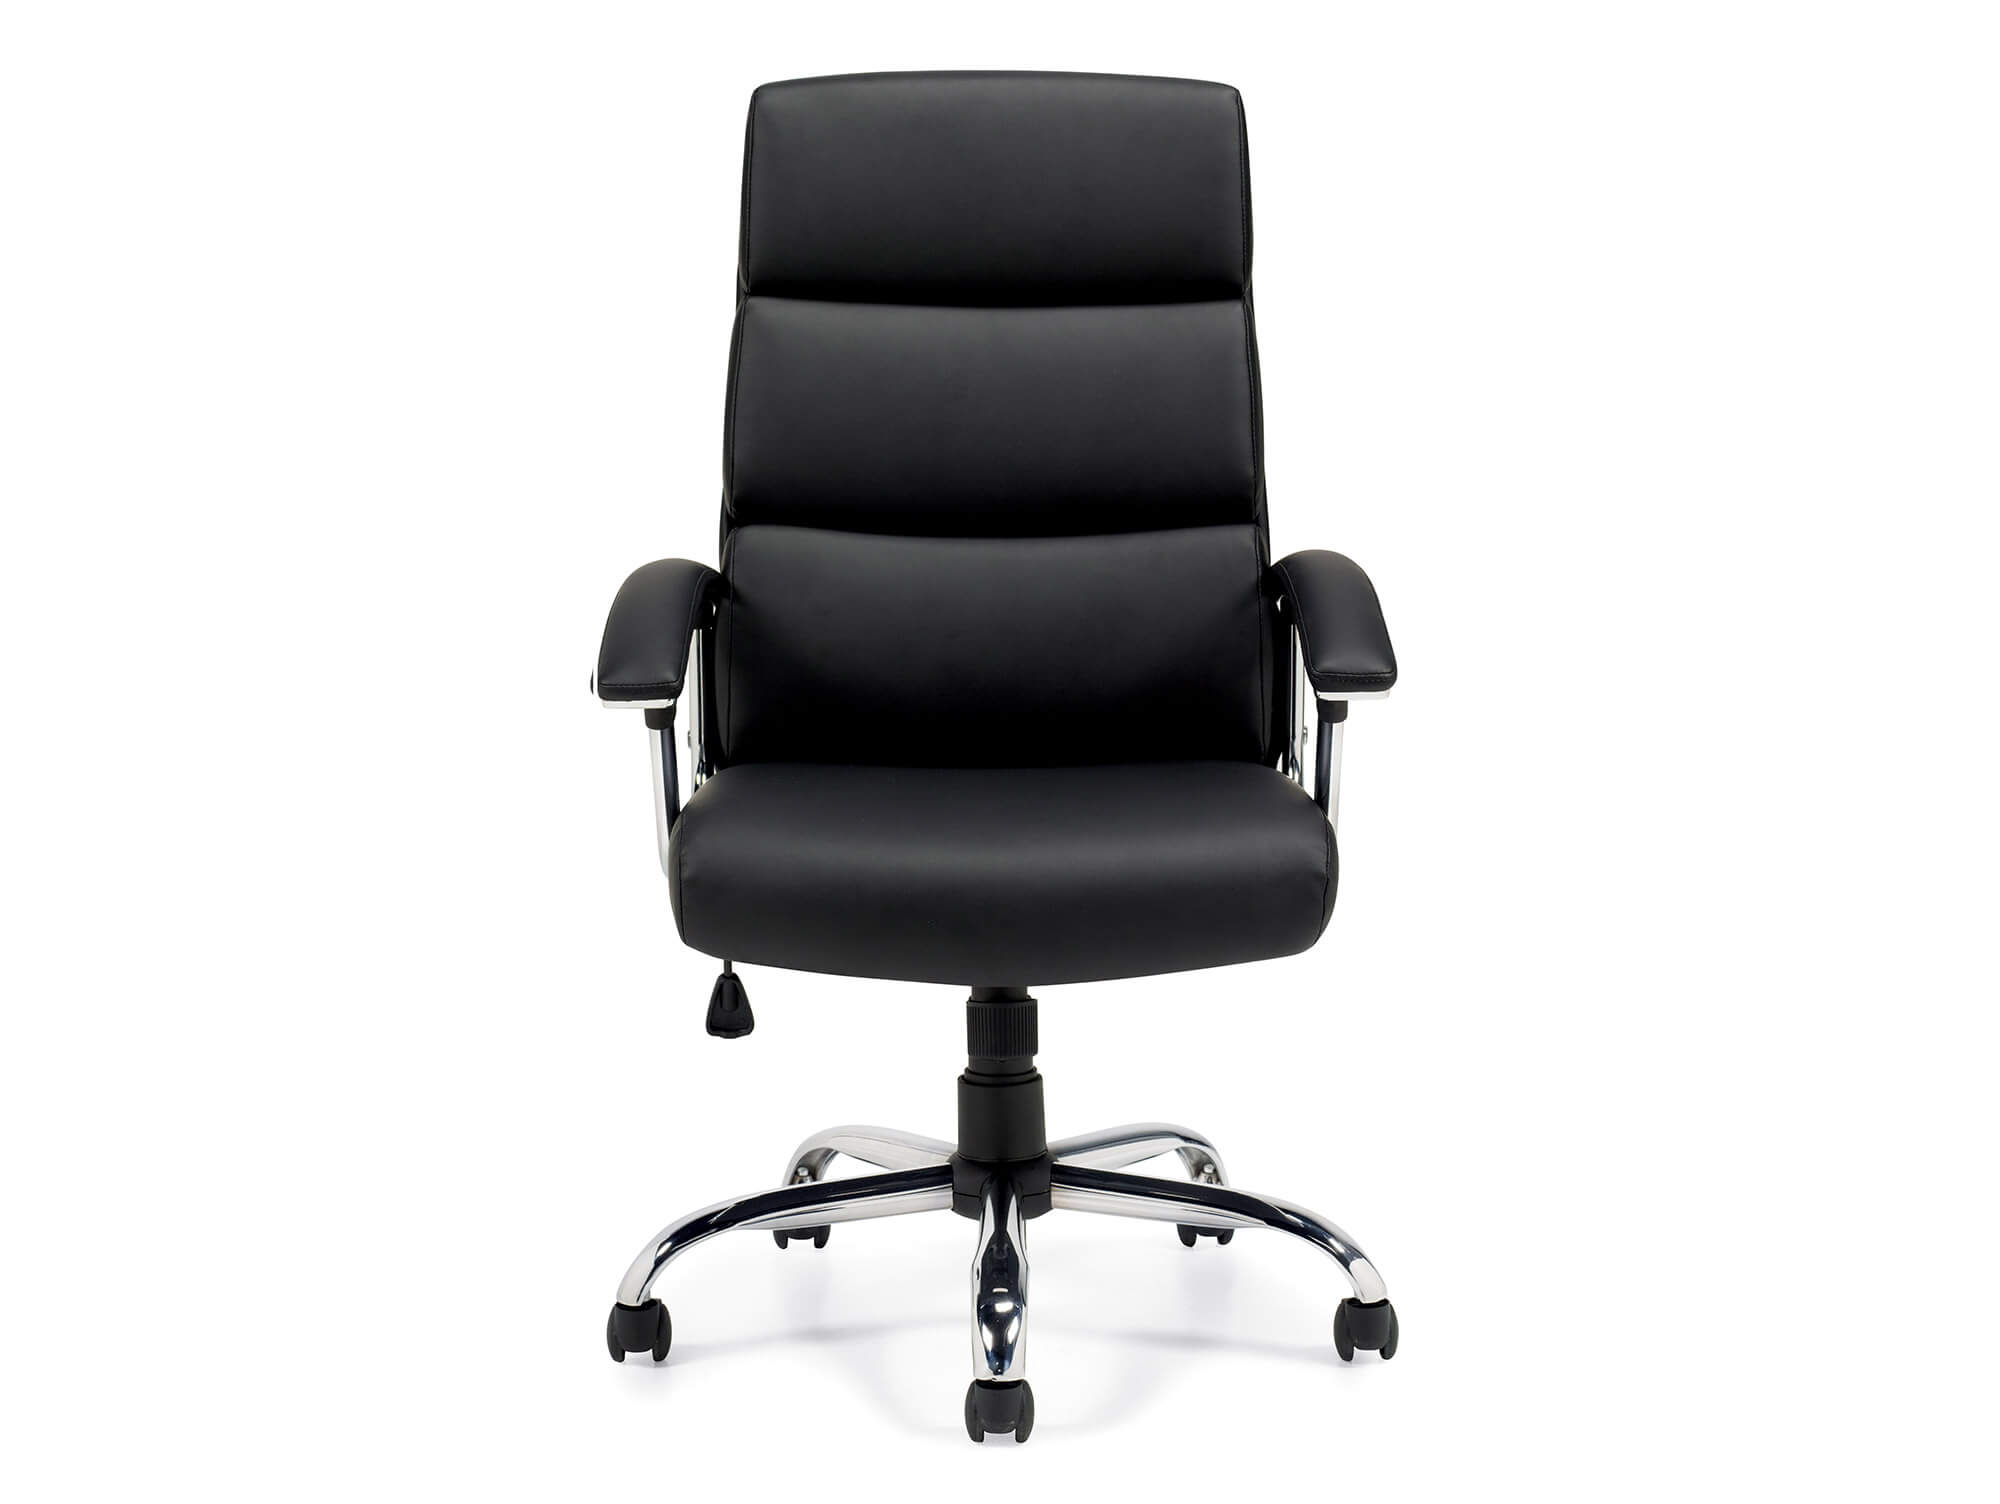 Conference style seating CUB 11858B GTO